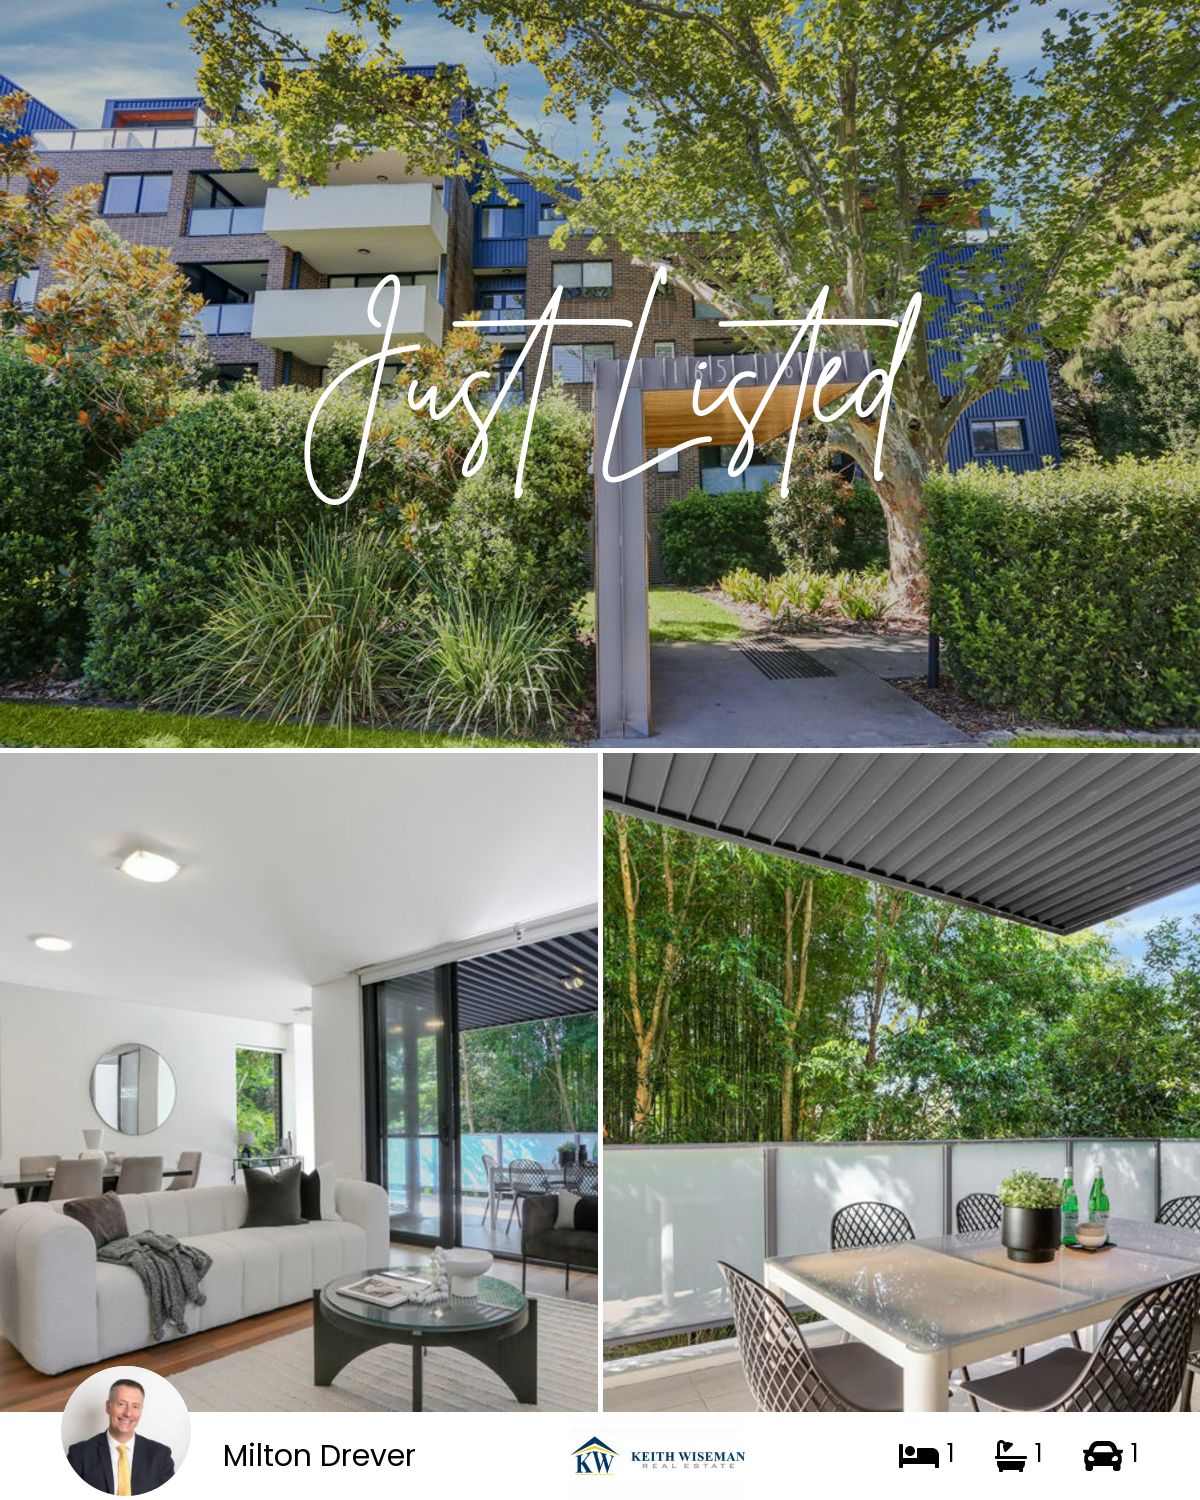 2 165-167 Rosedale Road St Ives, Nsw 2075, St Ives, NSW 2075 | Realty.com.au